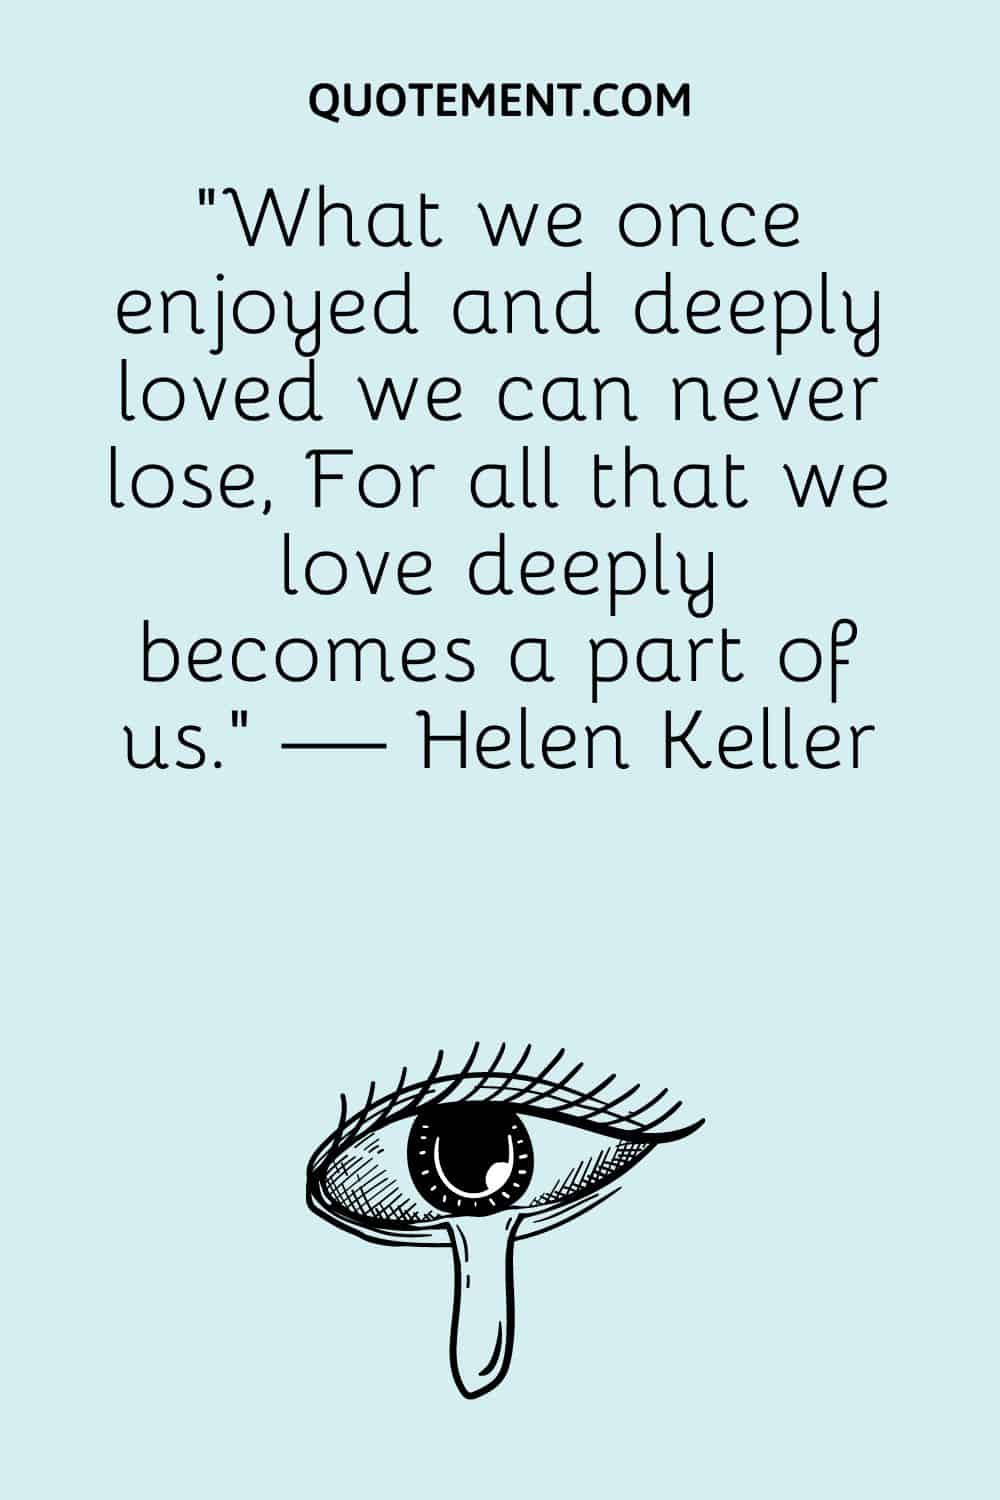 “What we once enjoyed and deeply loved we can never lose, For all that we love deeply becomes a part of us.” — Helen Keller